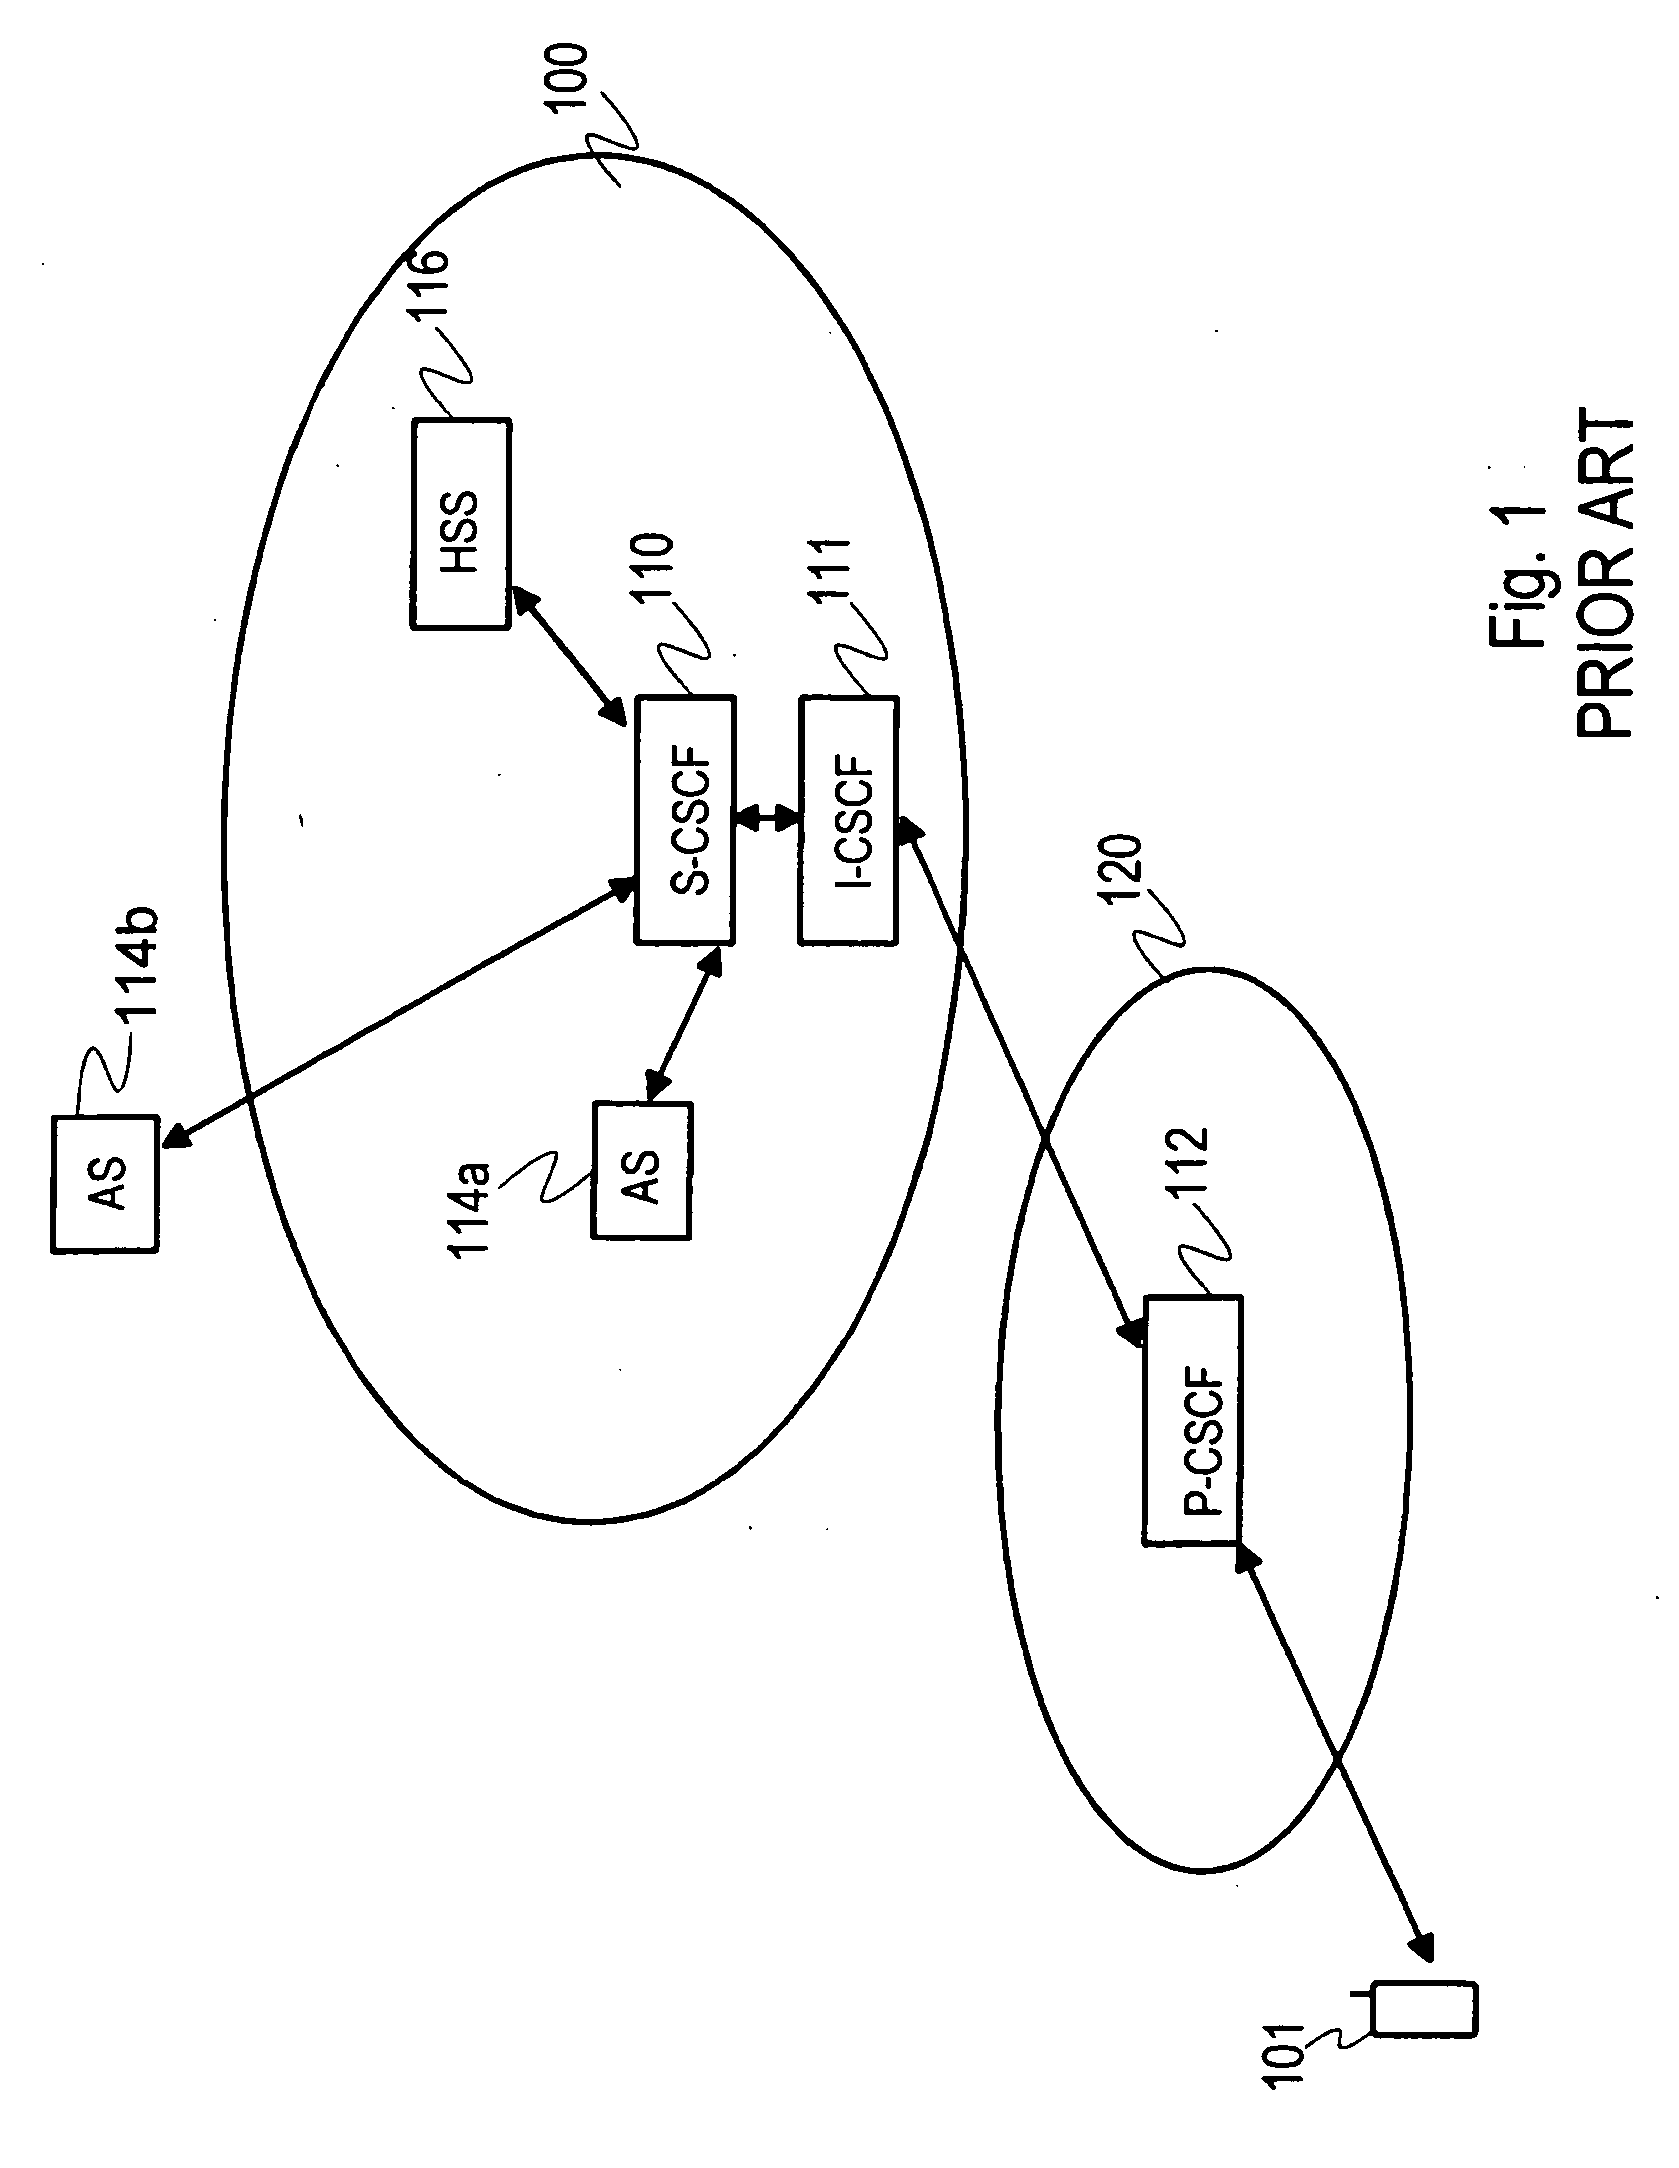 Service provisioning in a communications system